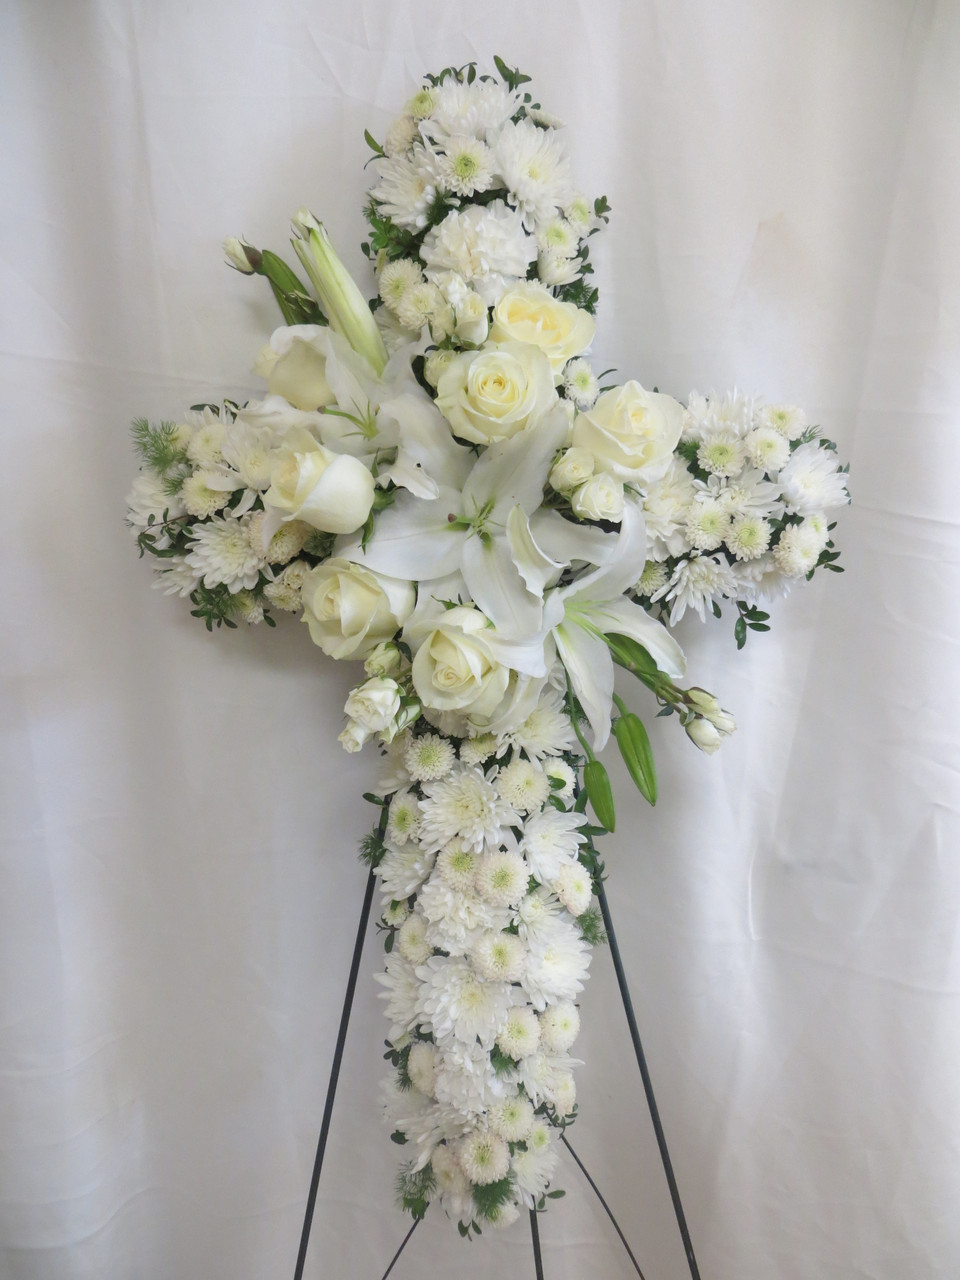 All white wreath for memorial service with lilies and roses